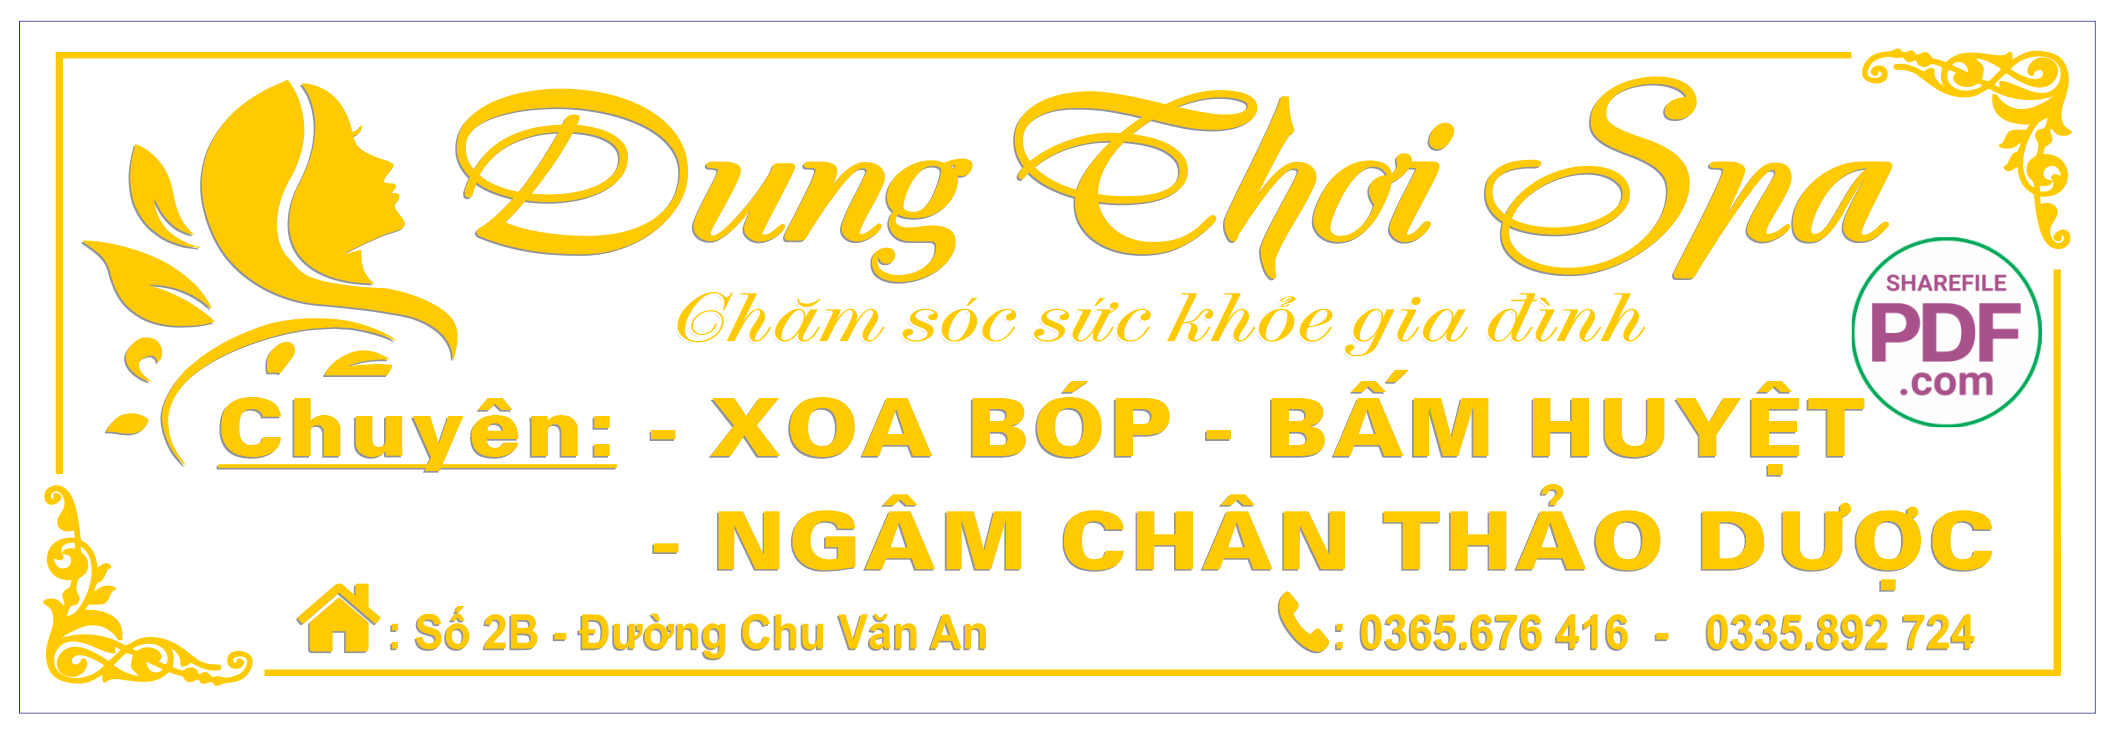 dung choi spa - cham soc suc khoe gia dinh.png